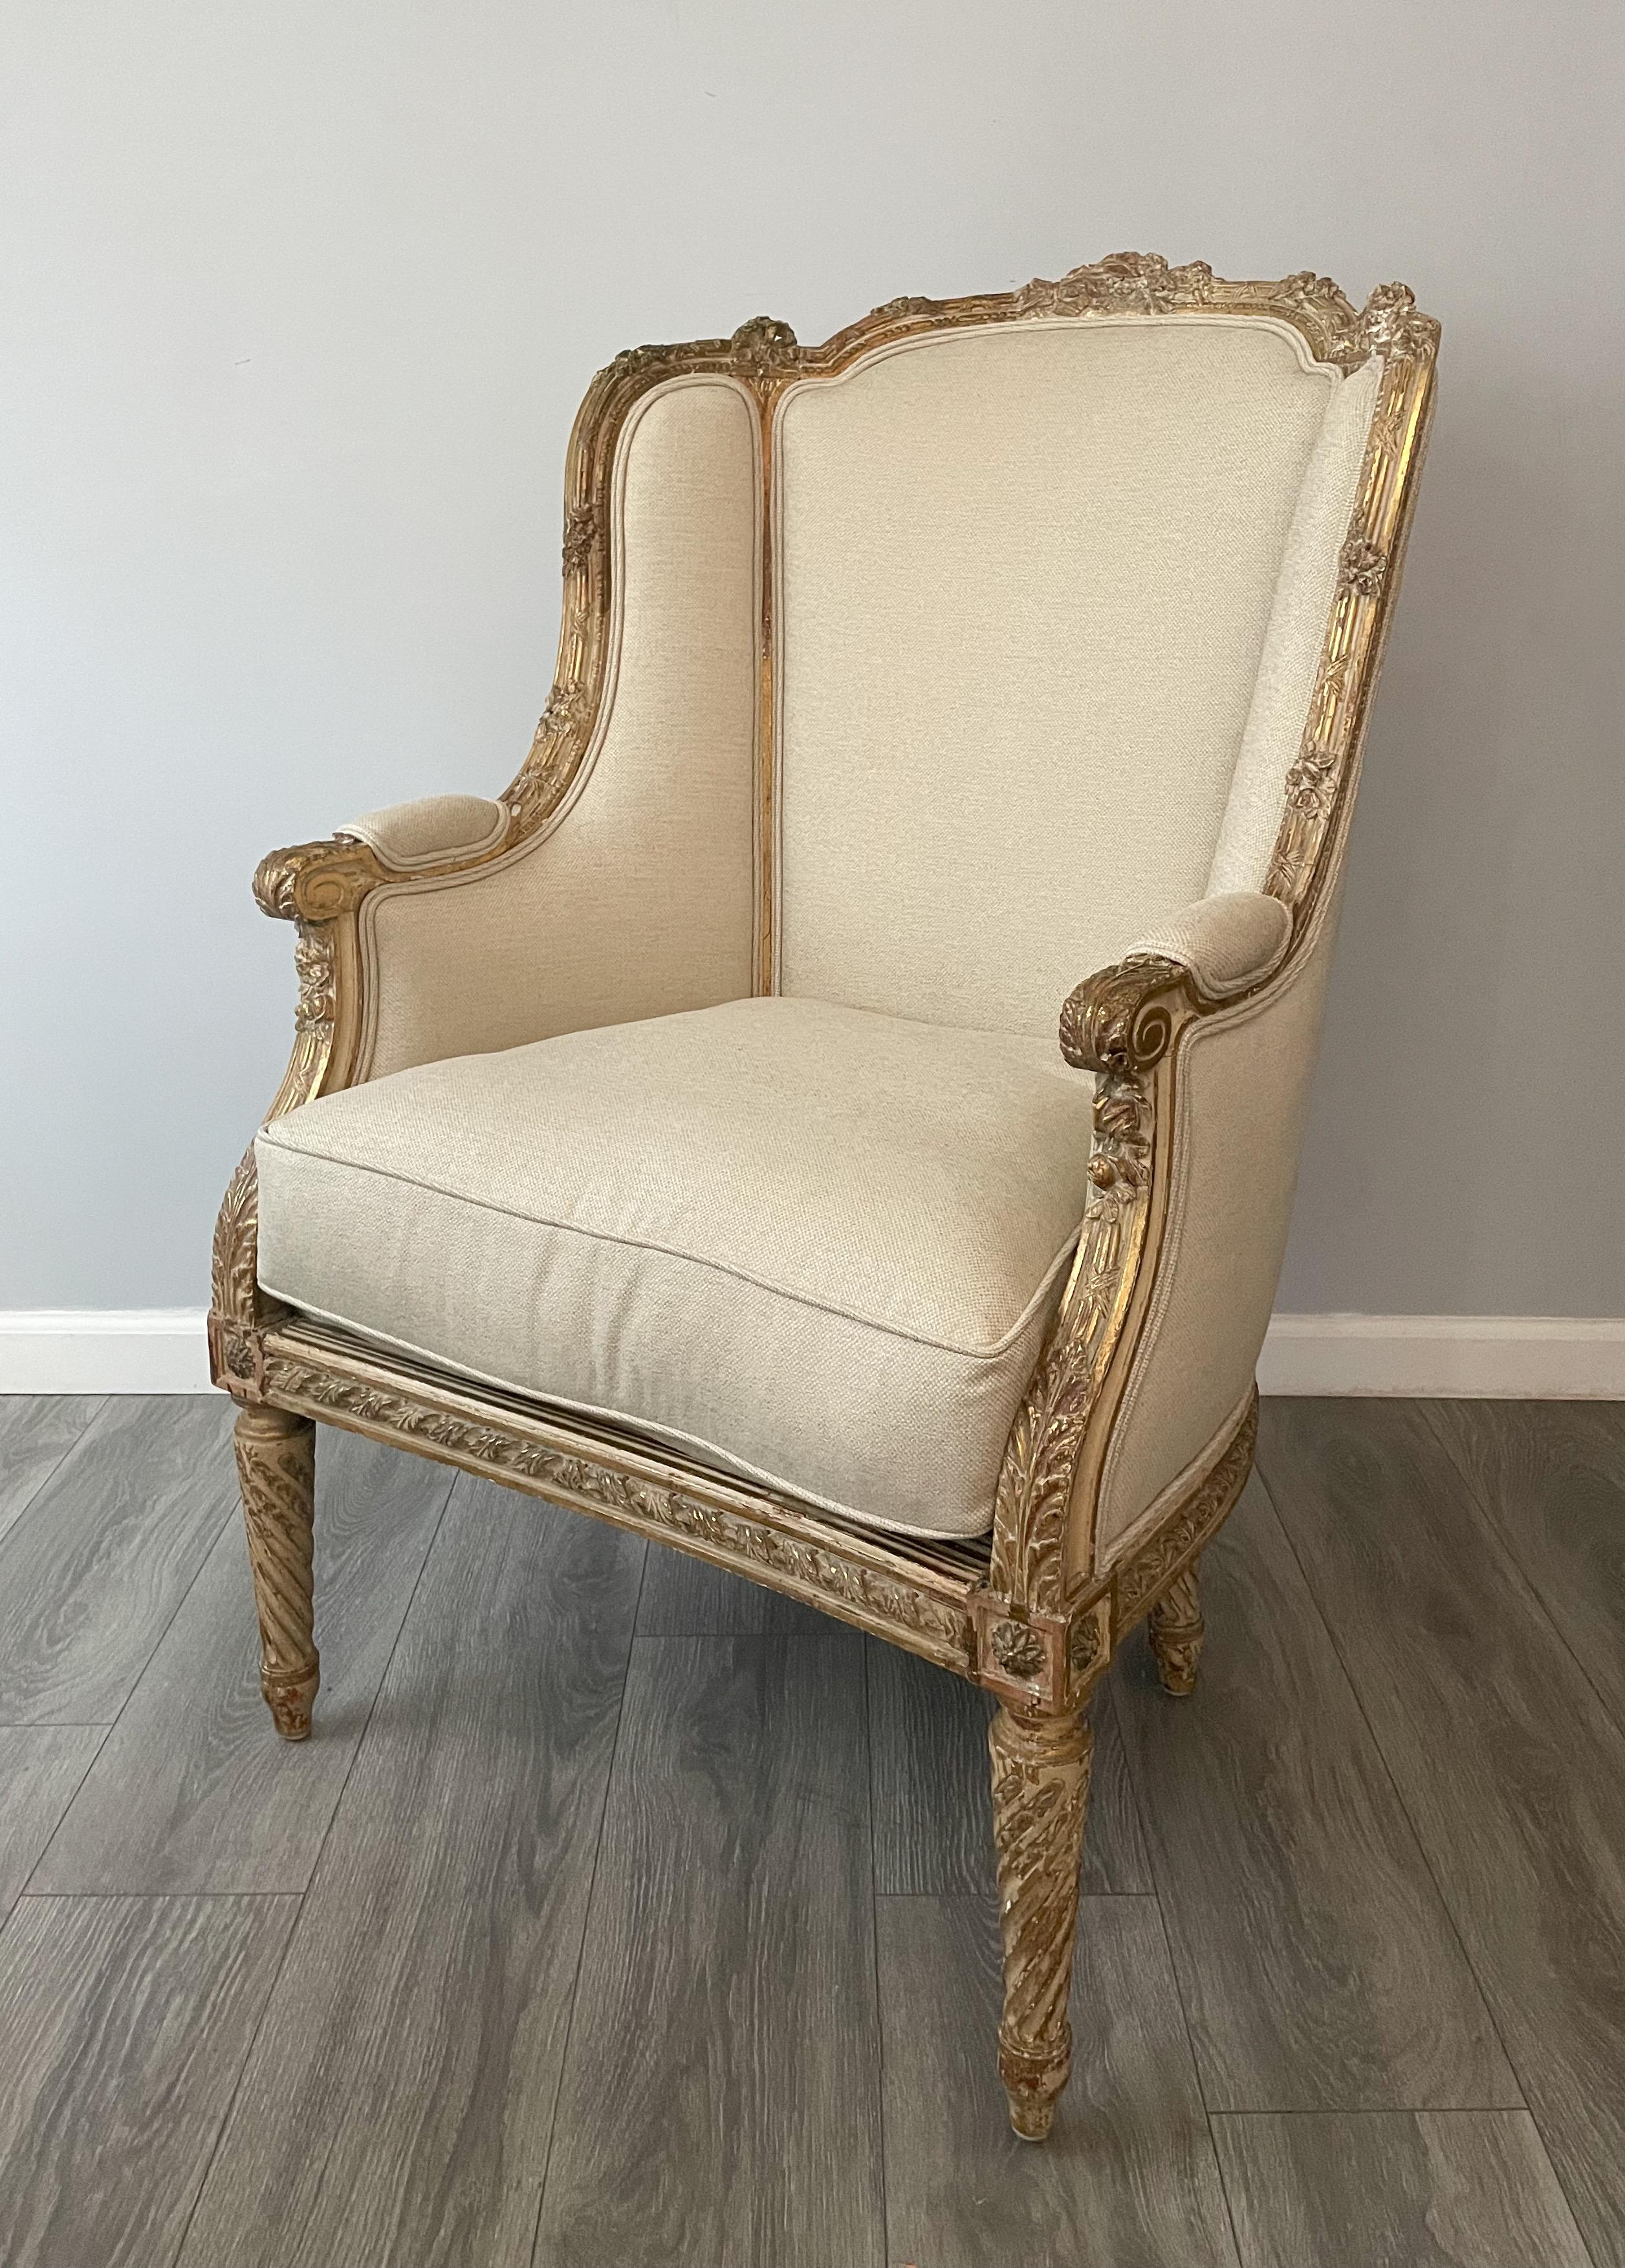 Fine, French 19th century carved bergère in the Louis XVI-style.

The chair features intricately carved decorations, a naturally distressed painted and parcel-gilt finish. New cotton linen upholstery with a loose goose down seat cushion and